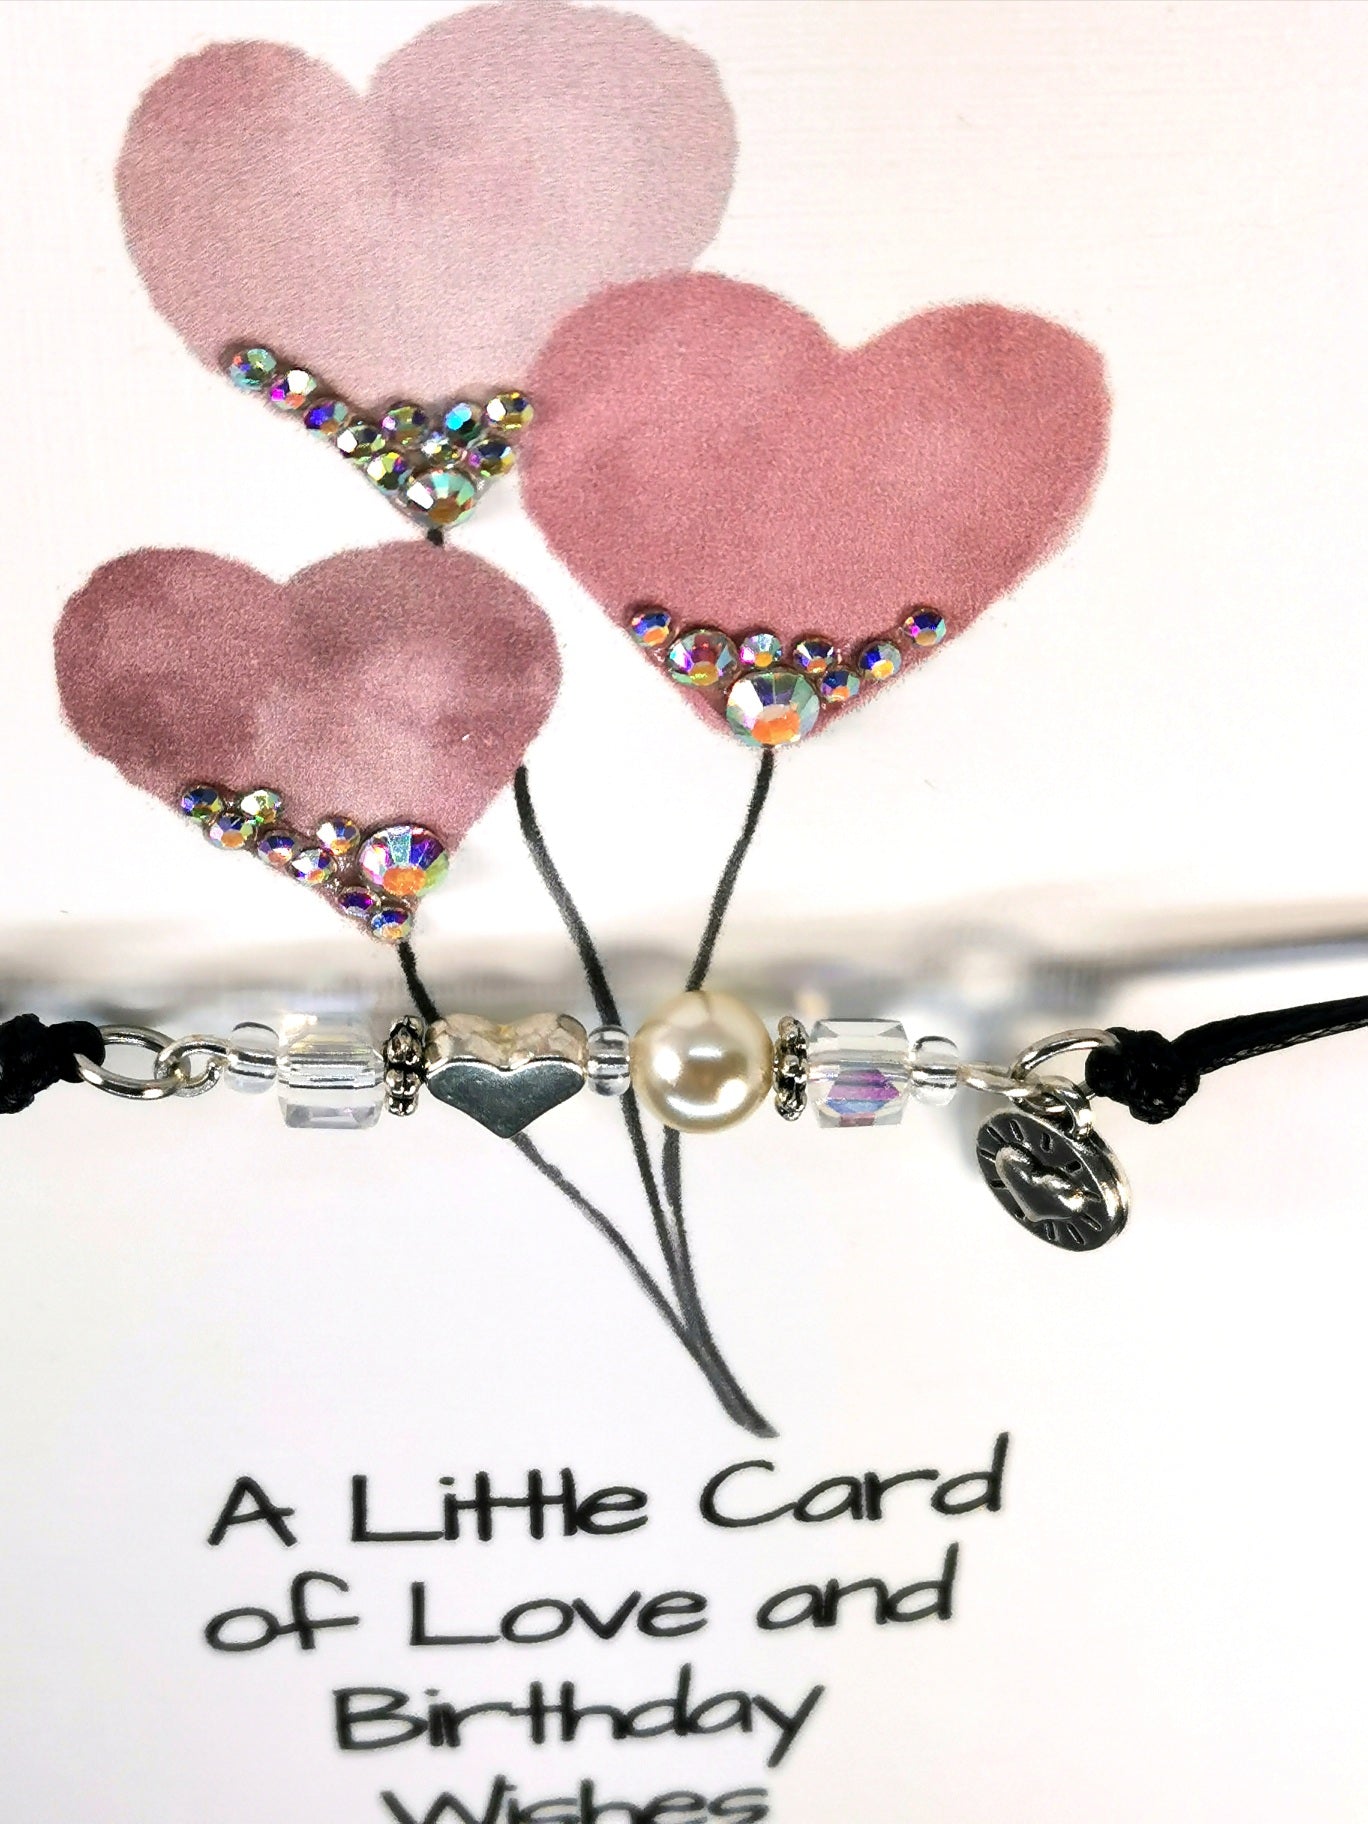 Heart Balloon Birthday Wishes  Bracelet Gift Card. A Little Card of Love and Birthday Wishes